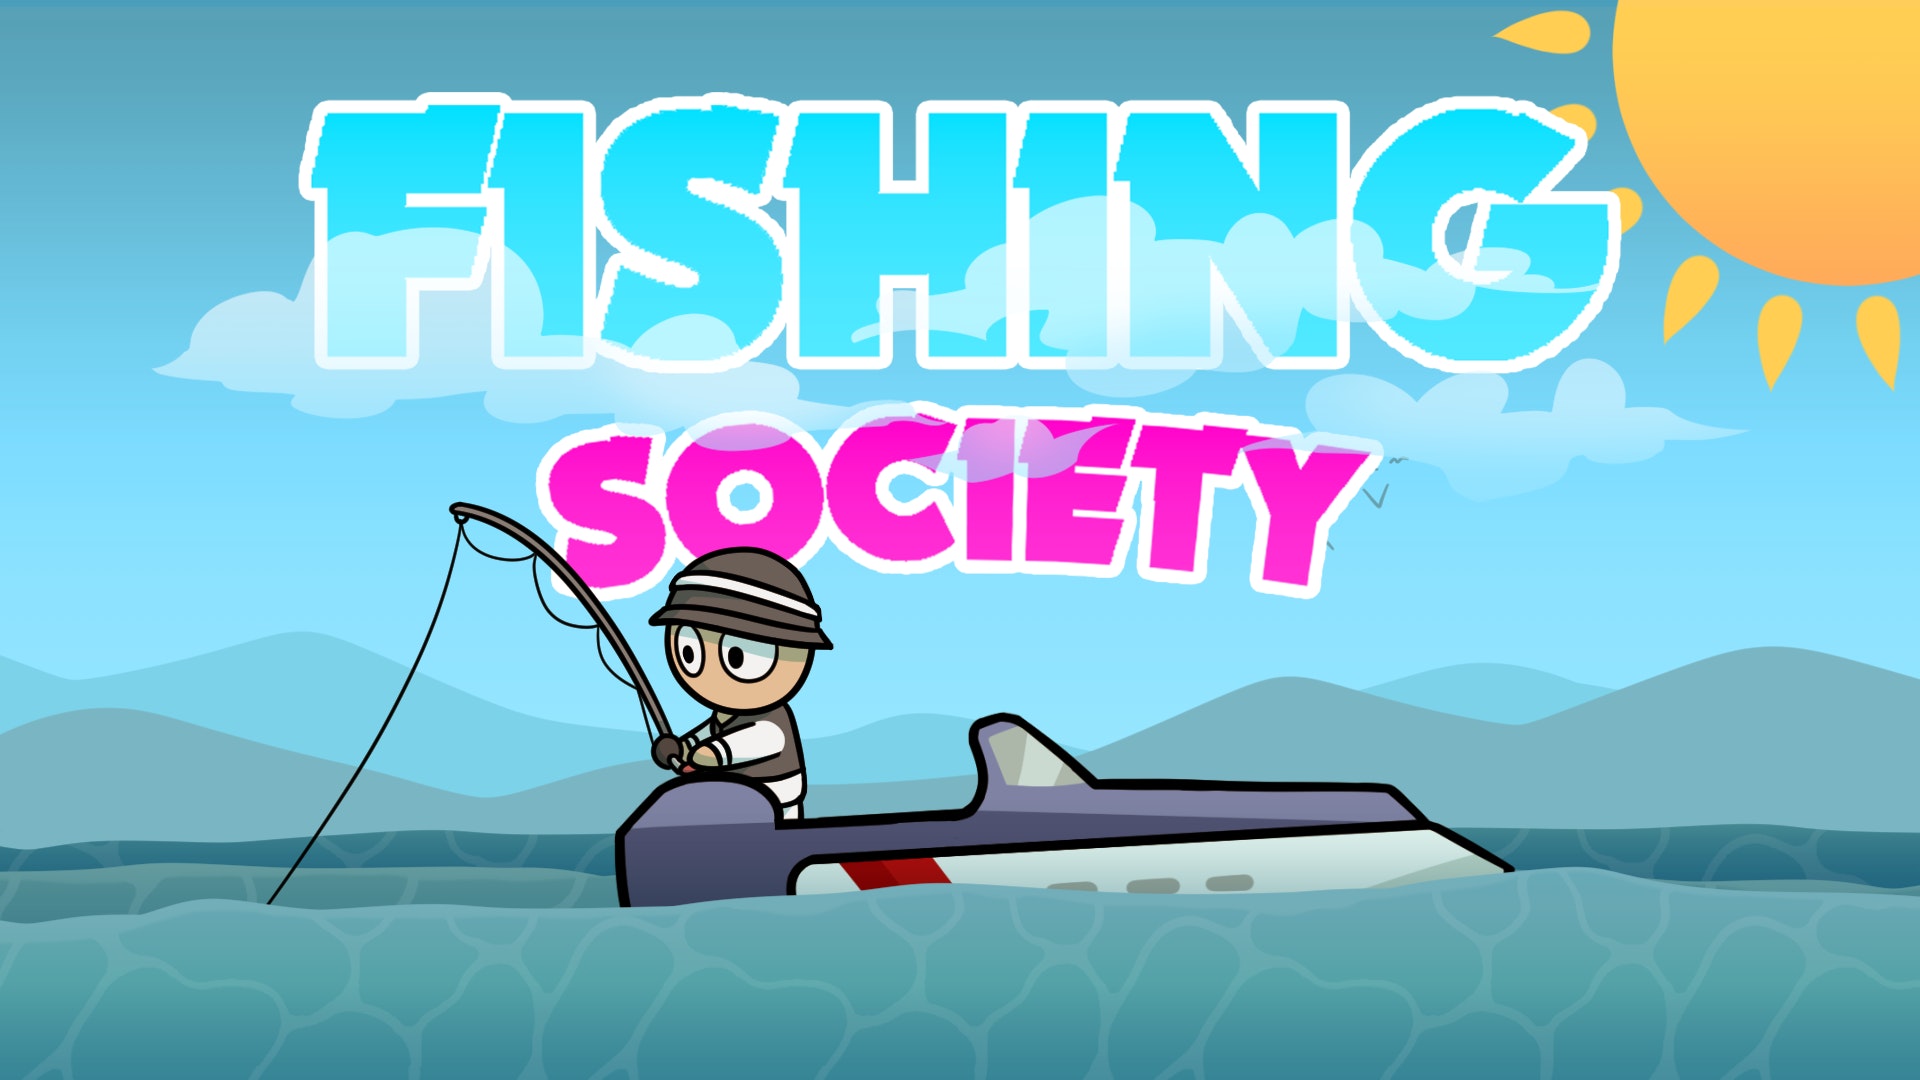 Fishing Games 🕹️ Play on CrazyGames